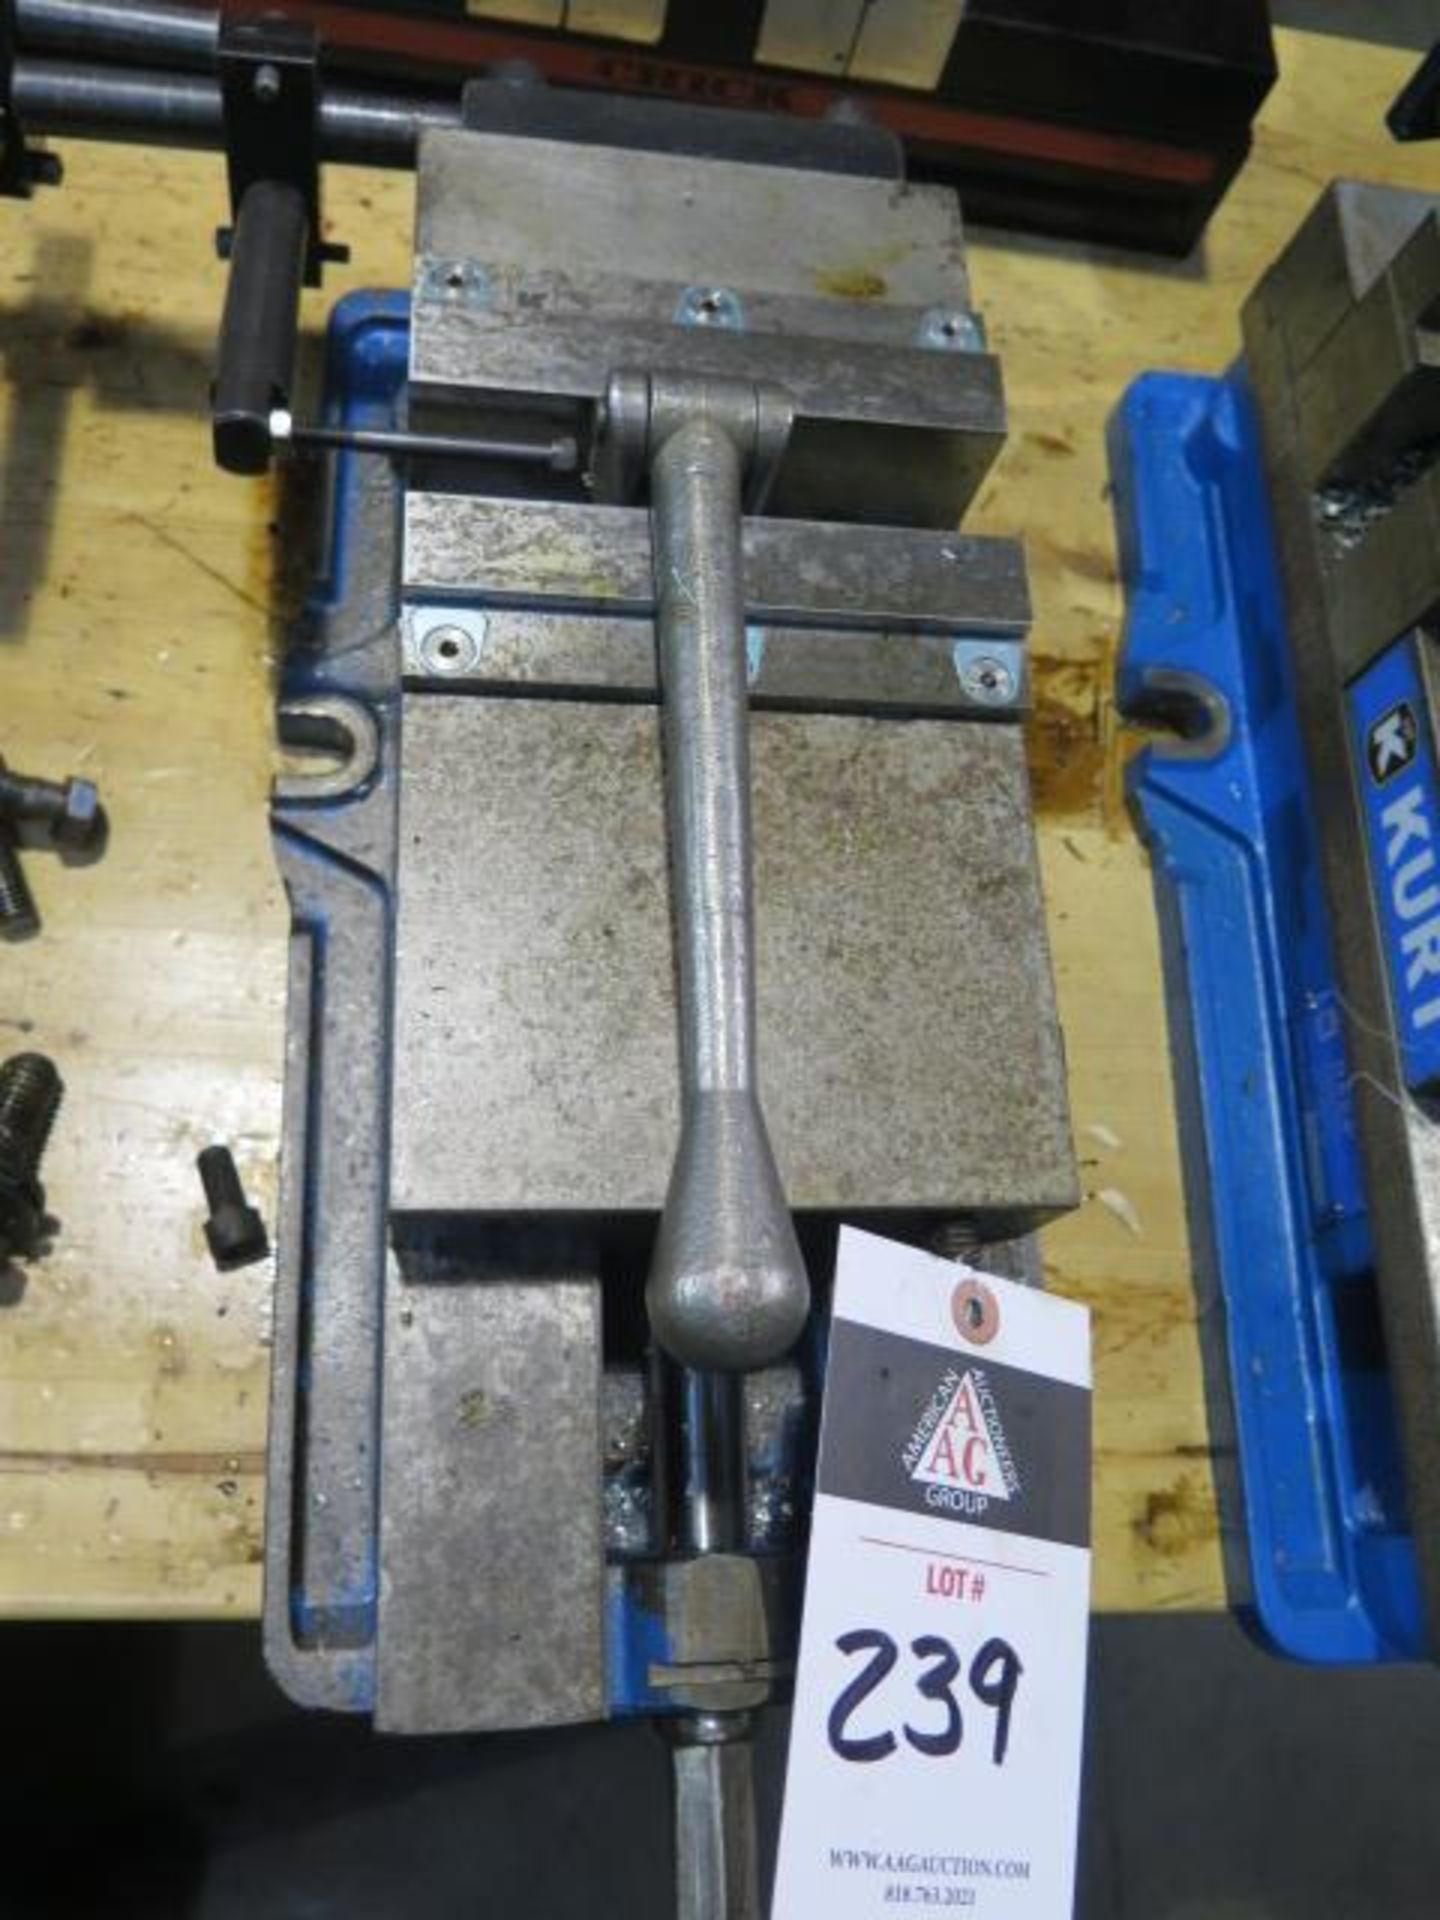 Kurt D688 6" Angle-Lock Vise (SOLD AS-IS - NO WARRANTY)